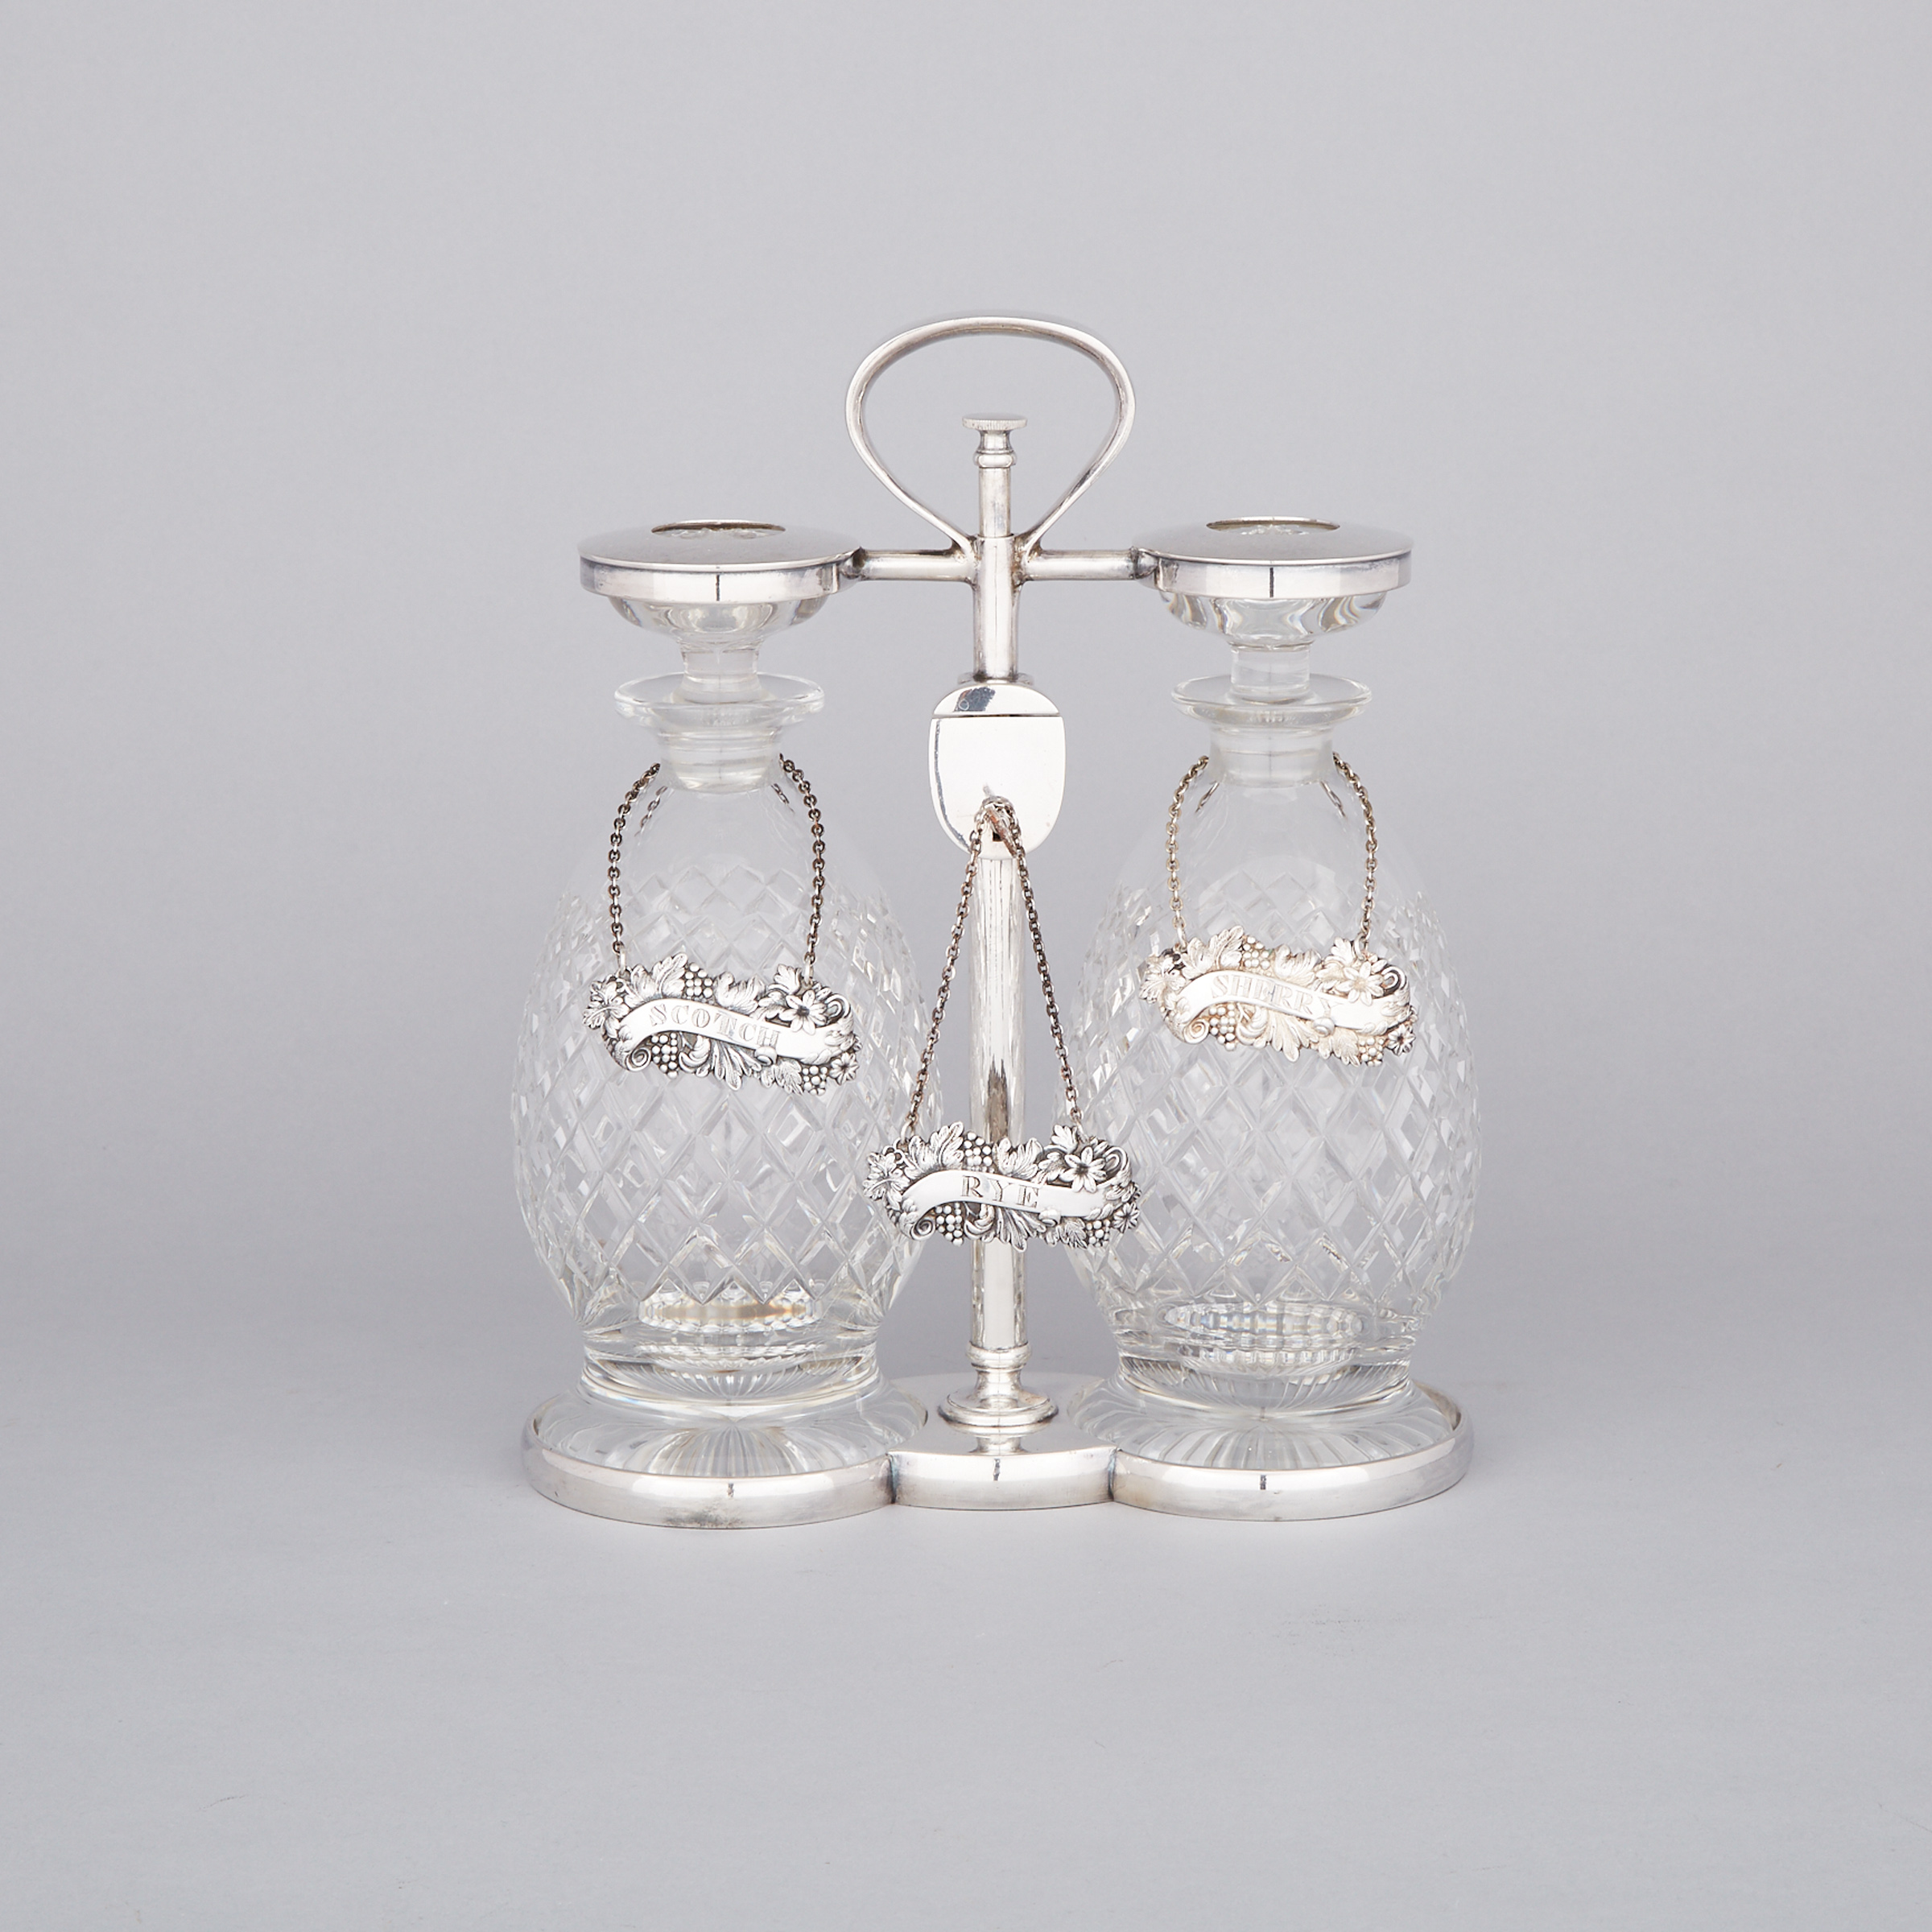 English Silver Plated and Cut Glass Two-Bottle Tantalus, Hukin & Heath, early 20th century